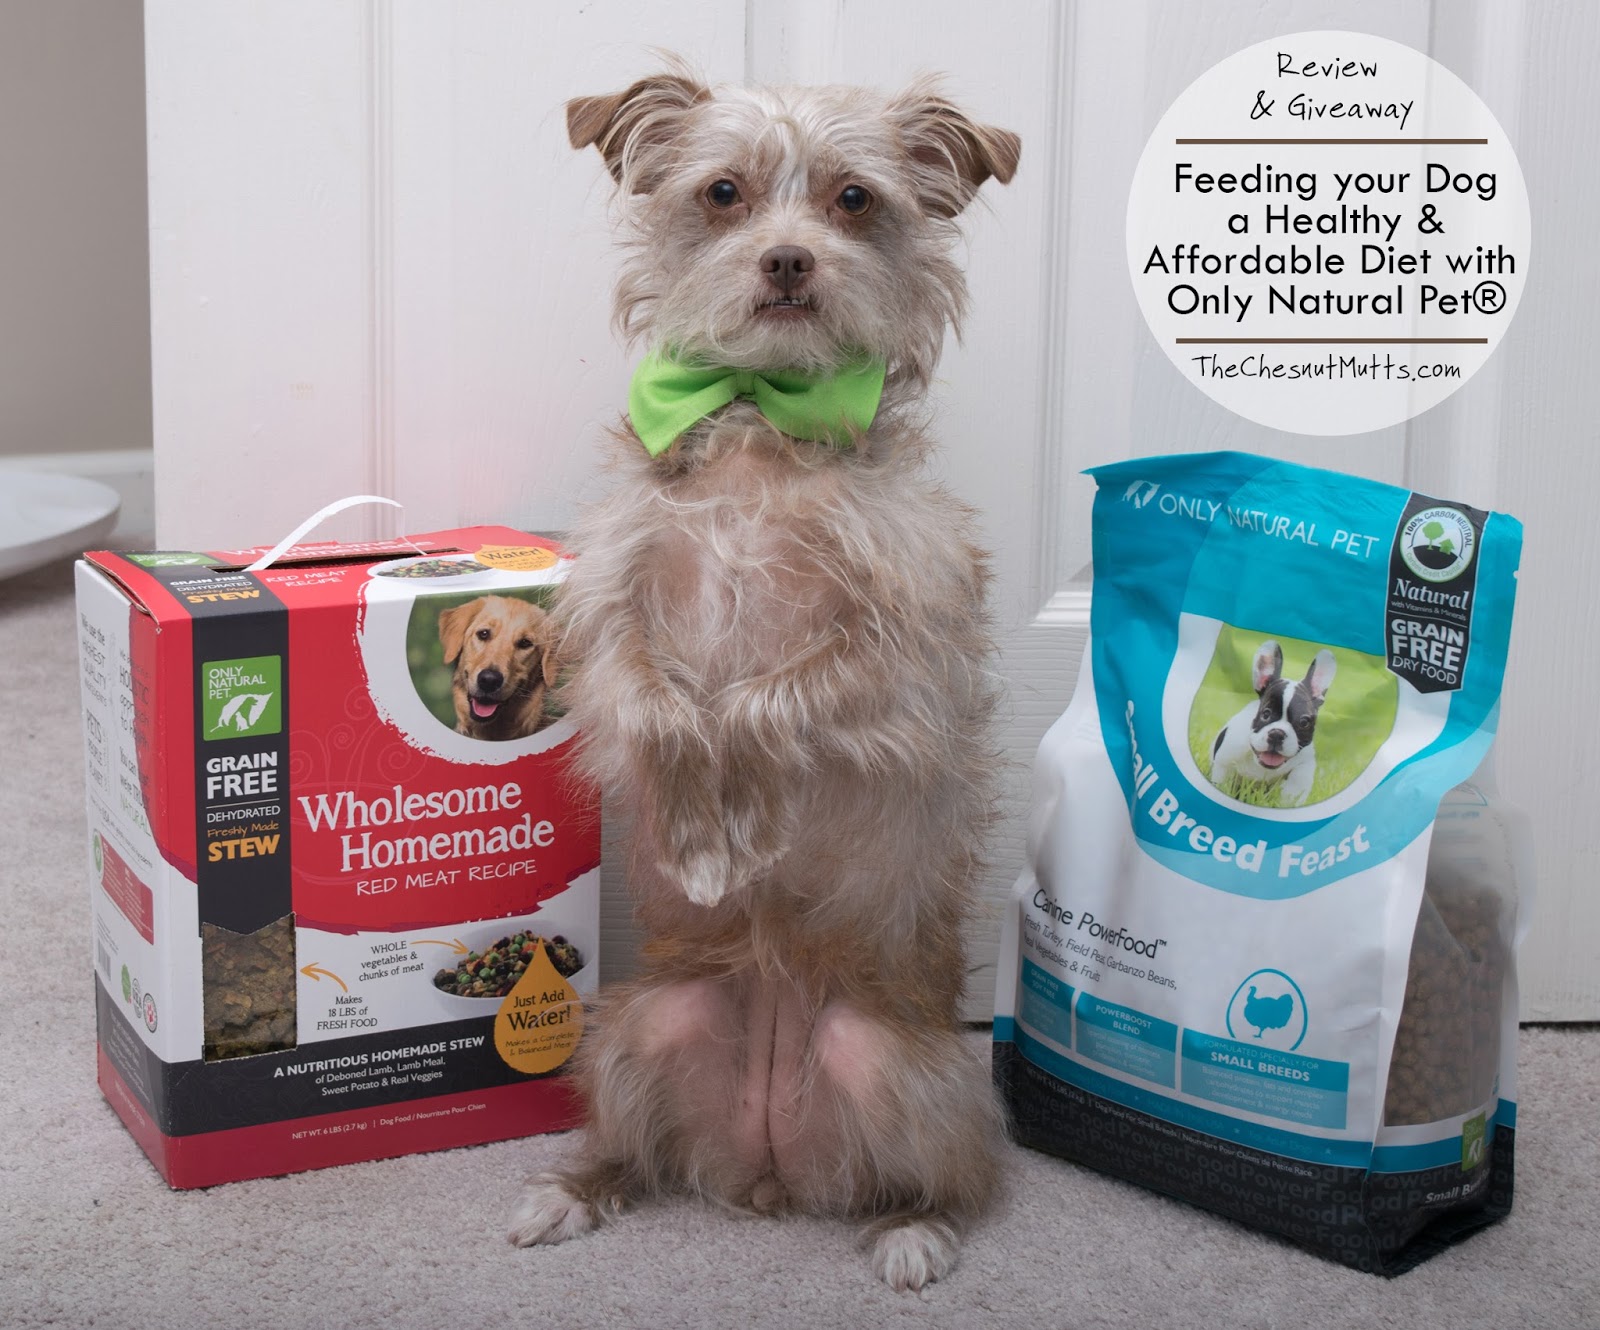 Review & Giveaway: Feeding your Dog a Healthy & Affordable Diet with